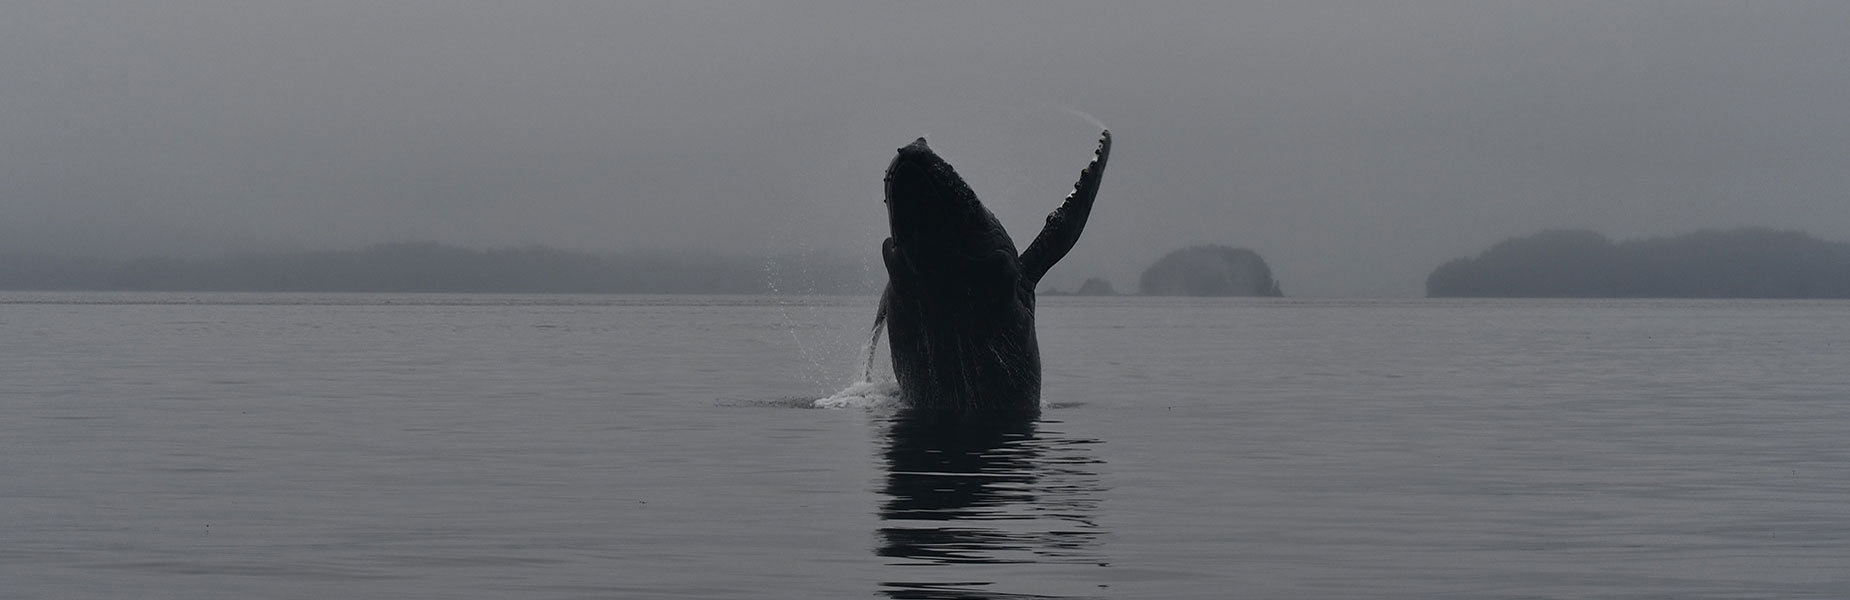 Captain Josh invites you to join him for a thrilling whale watching tour in Hoonah, Alaska.